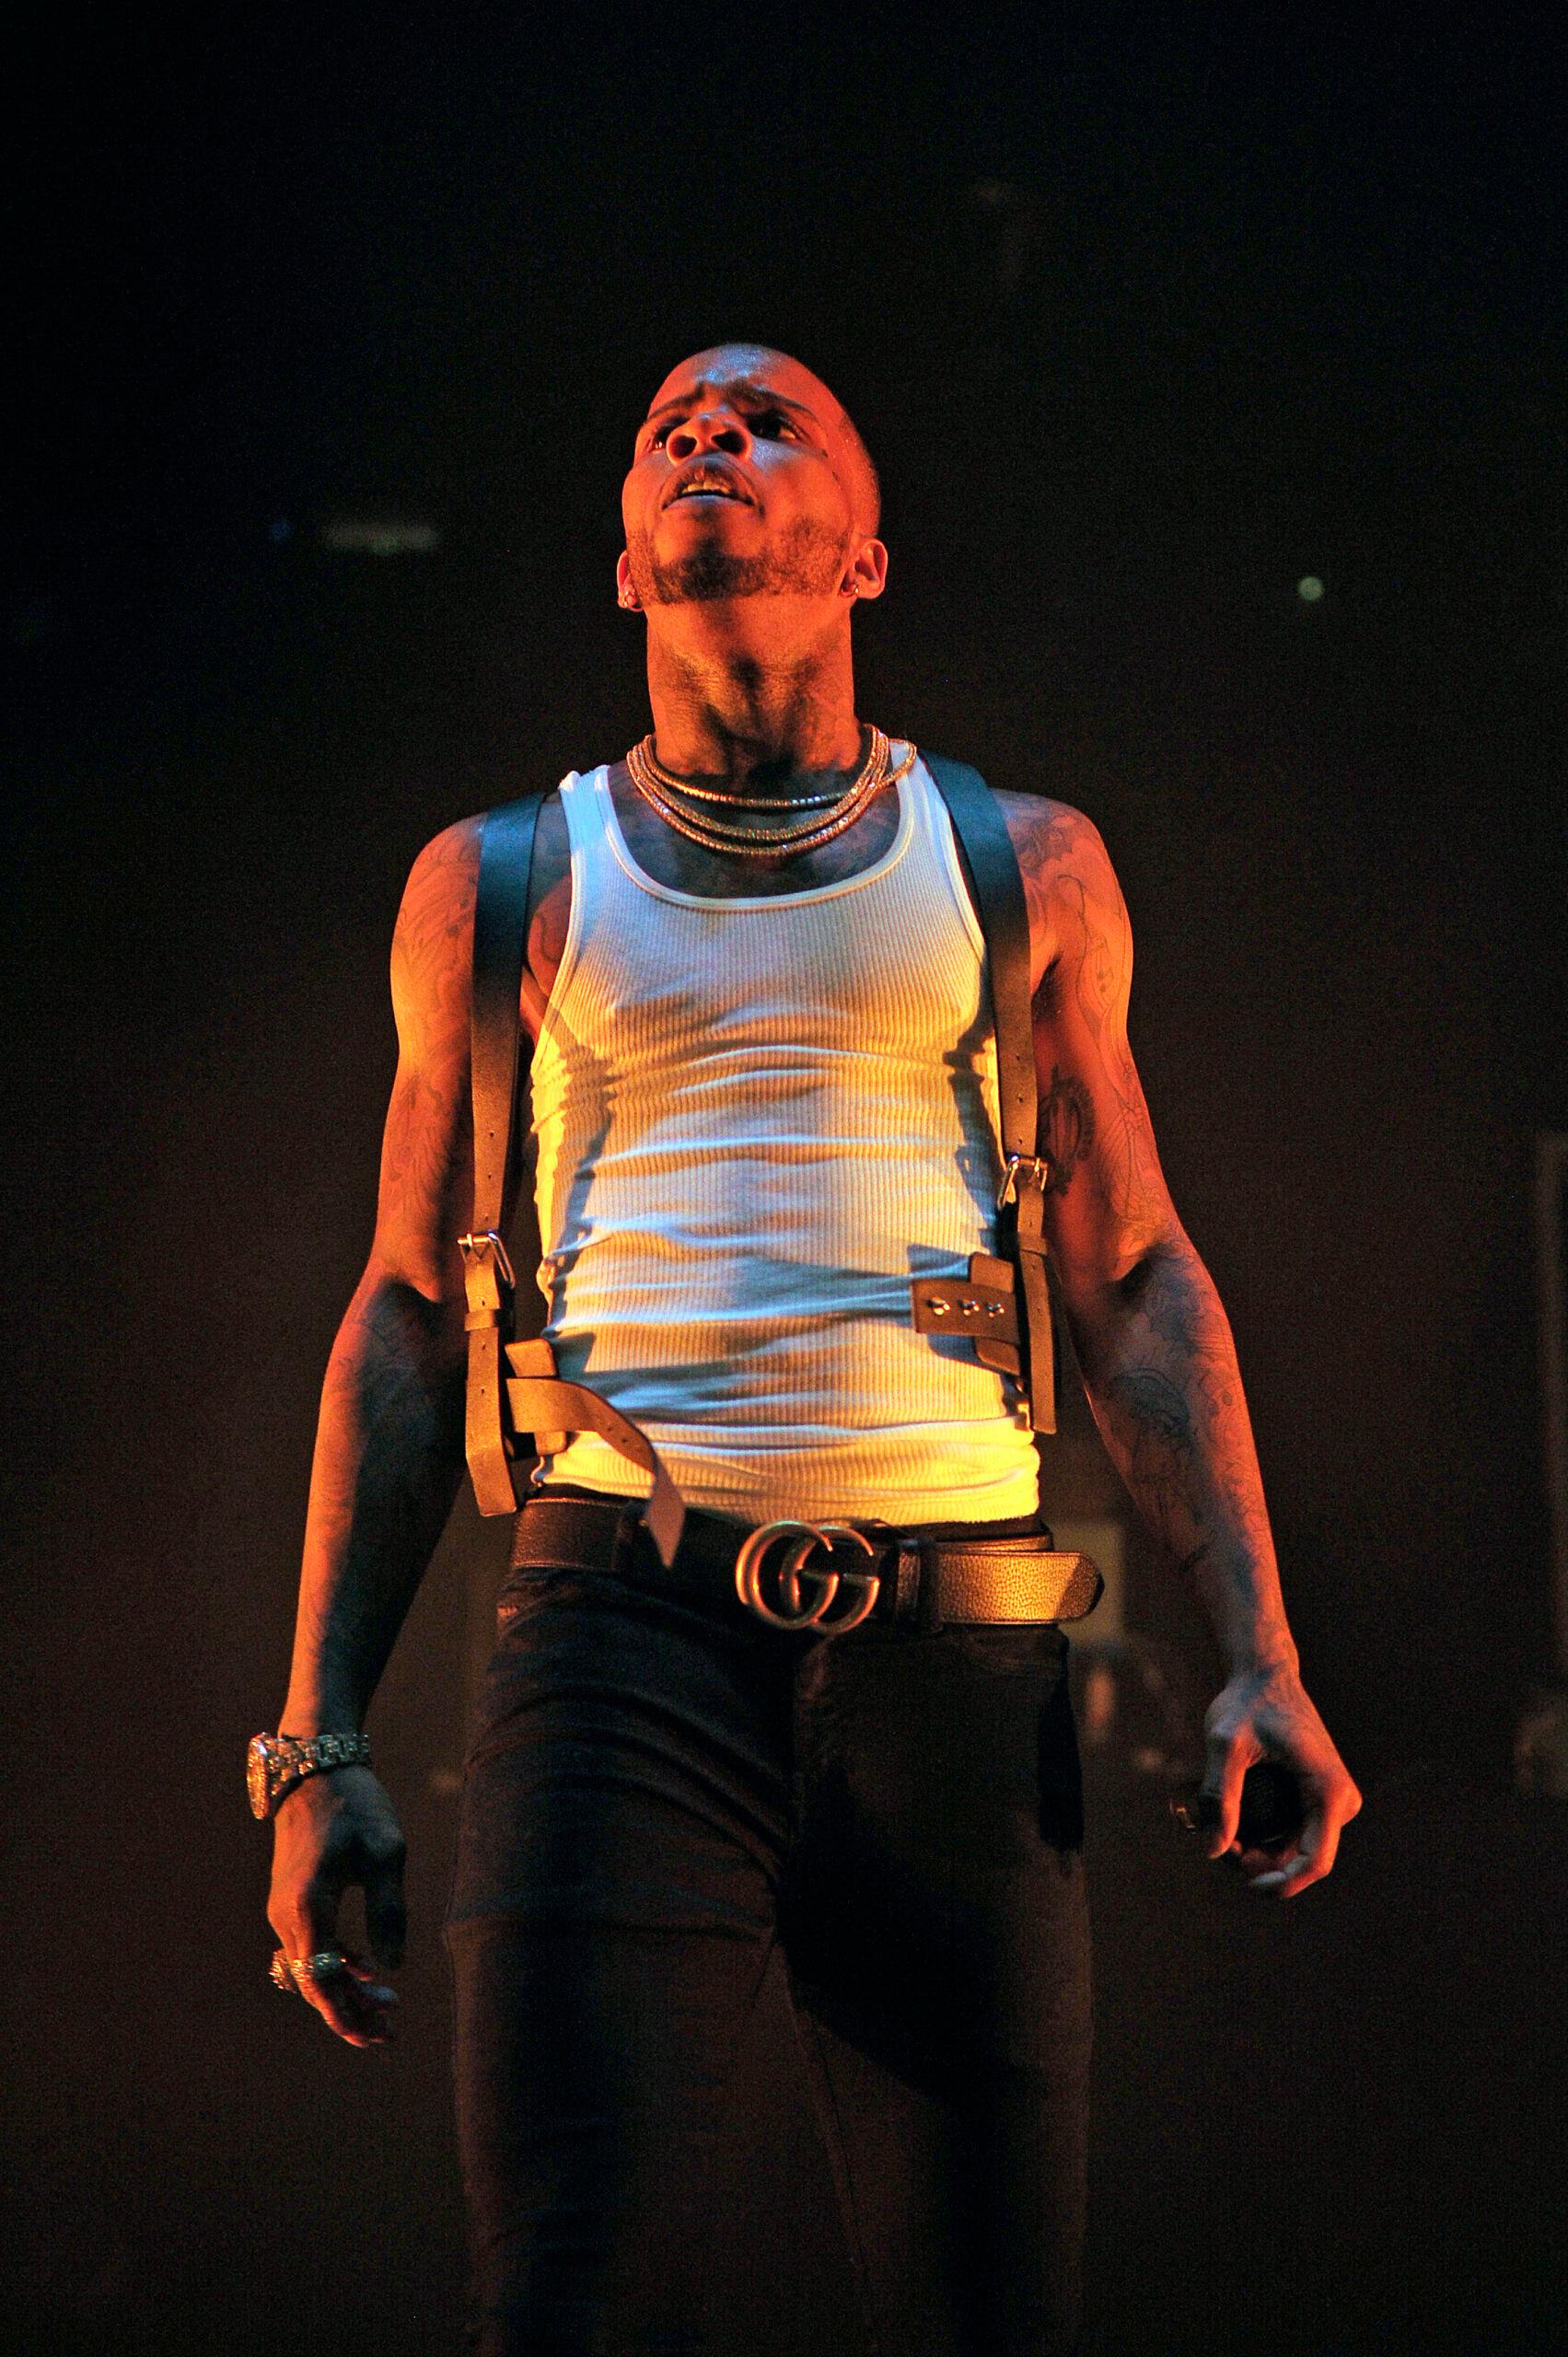 Tory Lanez performing at Brixton Academy